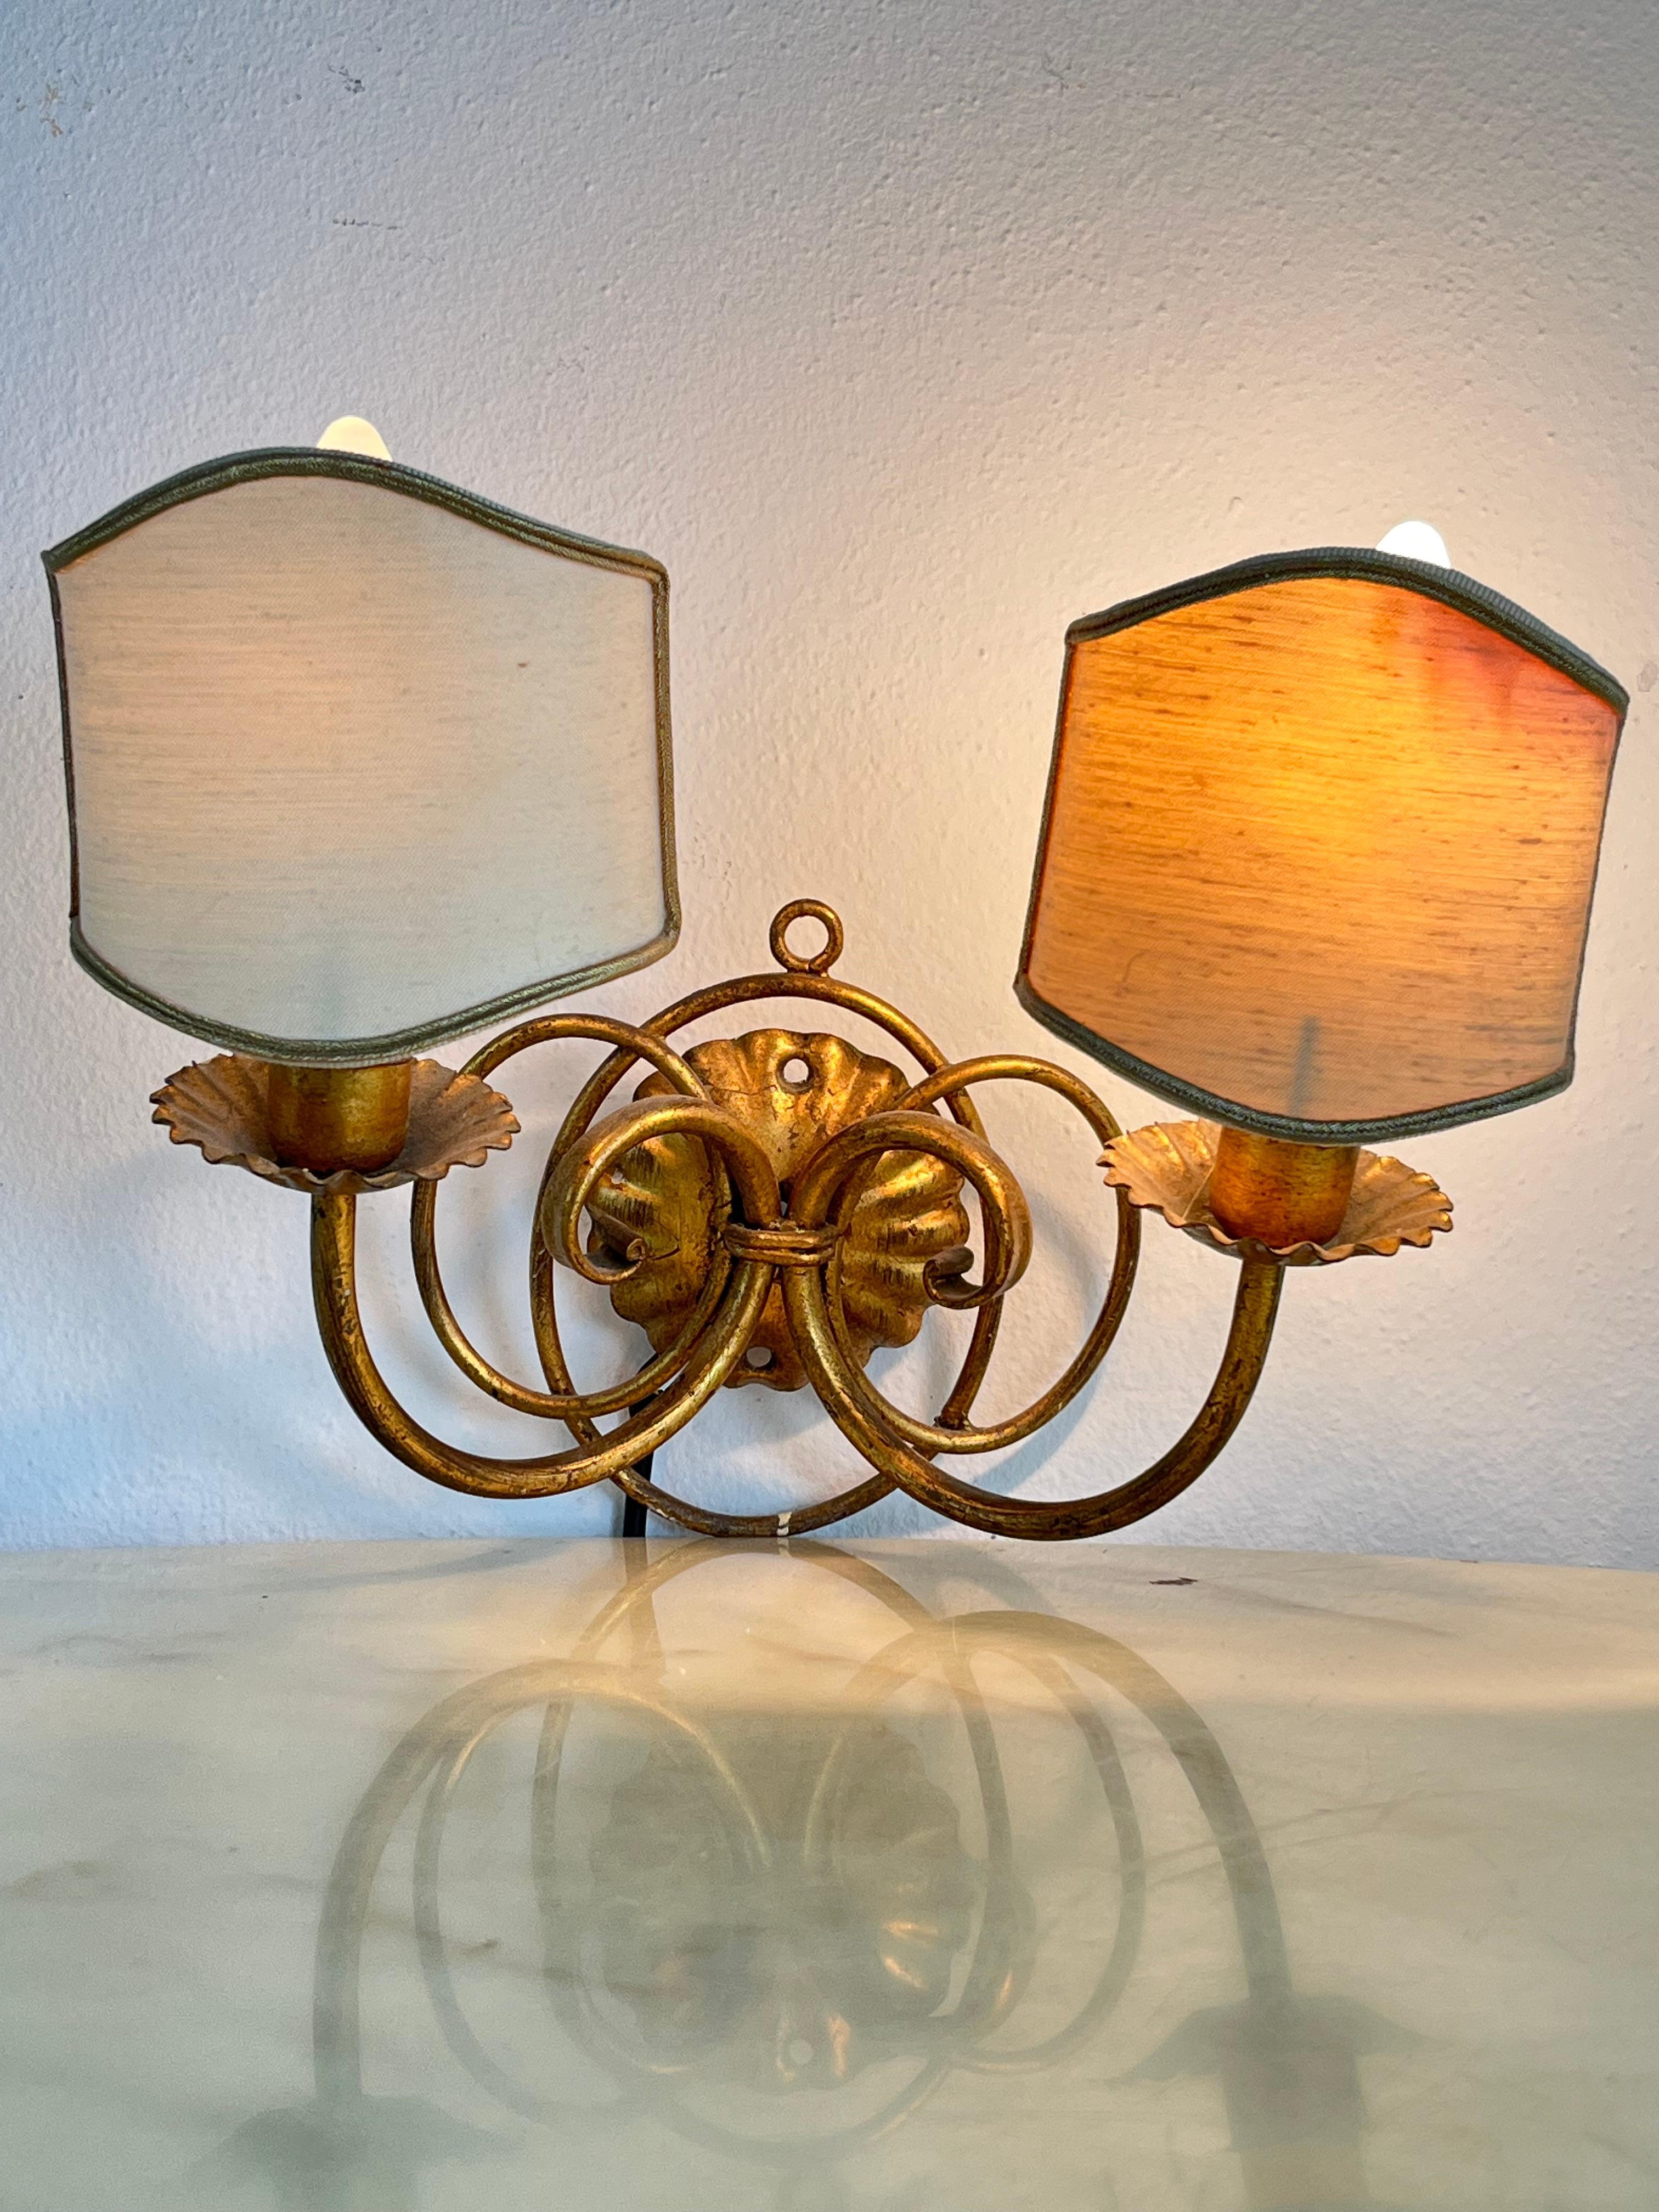 Set of 4 Golden Wrought Iron Wall Lights 80s Italian Design For Sale 3